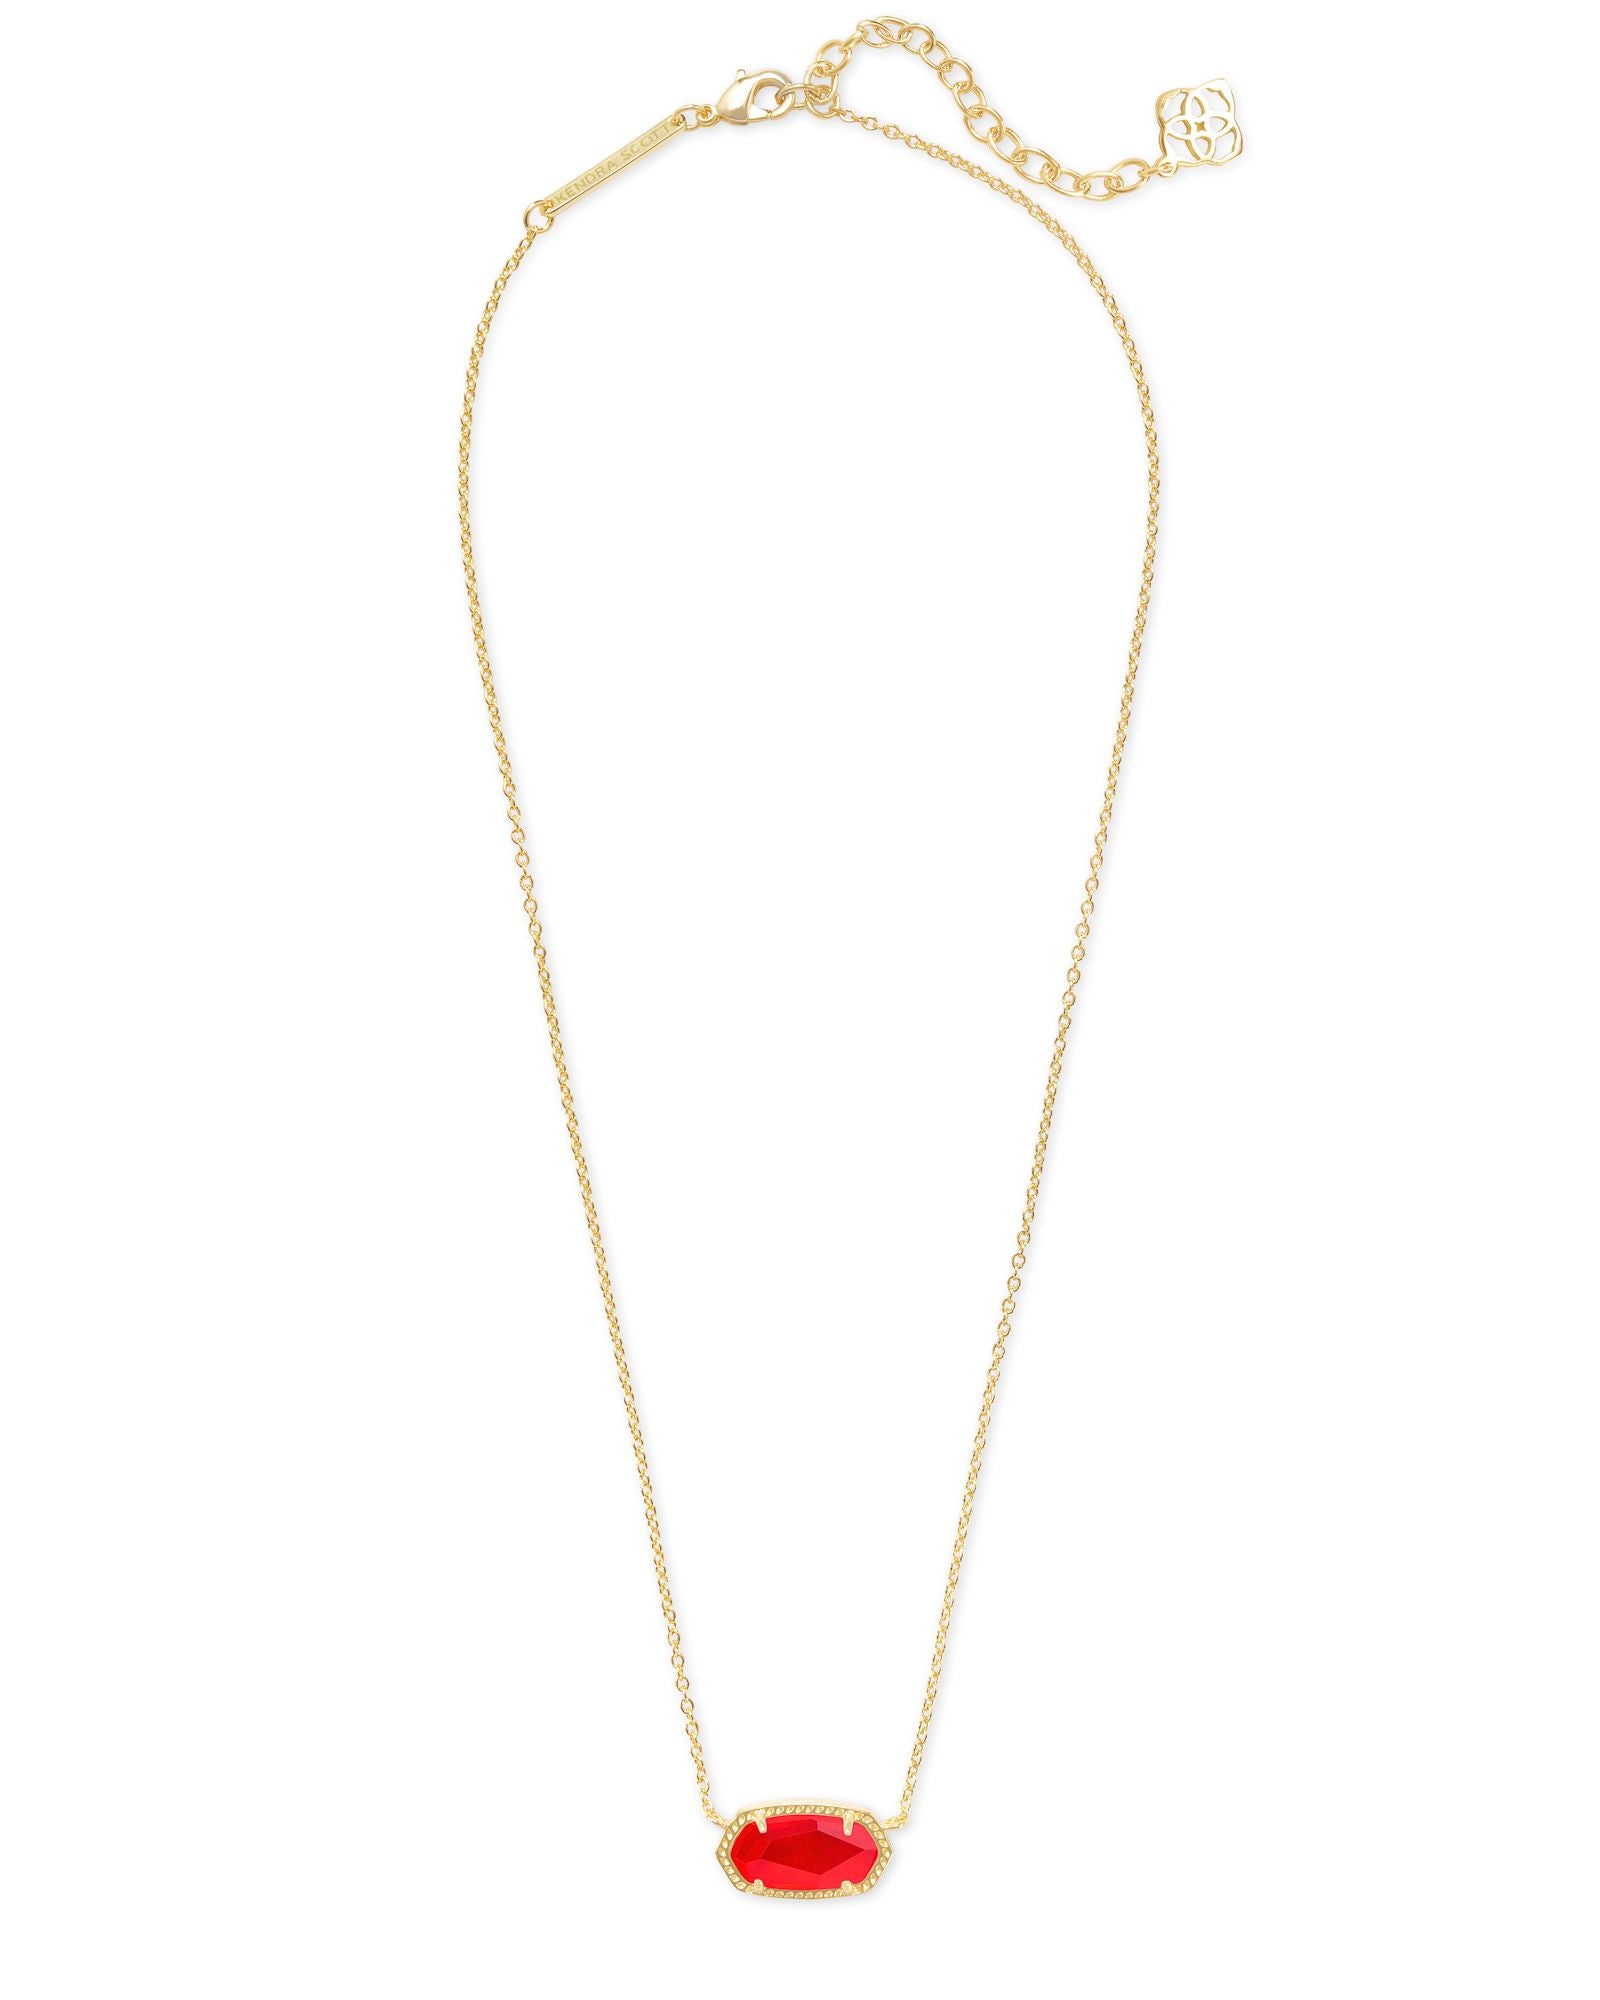 Kendra Scott | Elisa Gold Pendant Necklace in Red Illusion - Giddy Up Glamour Boutique